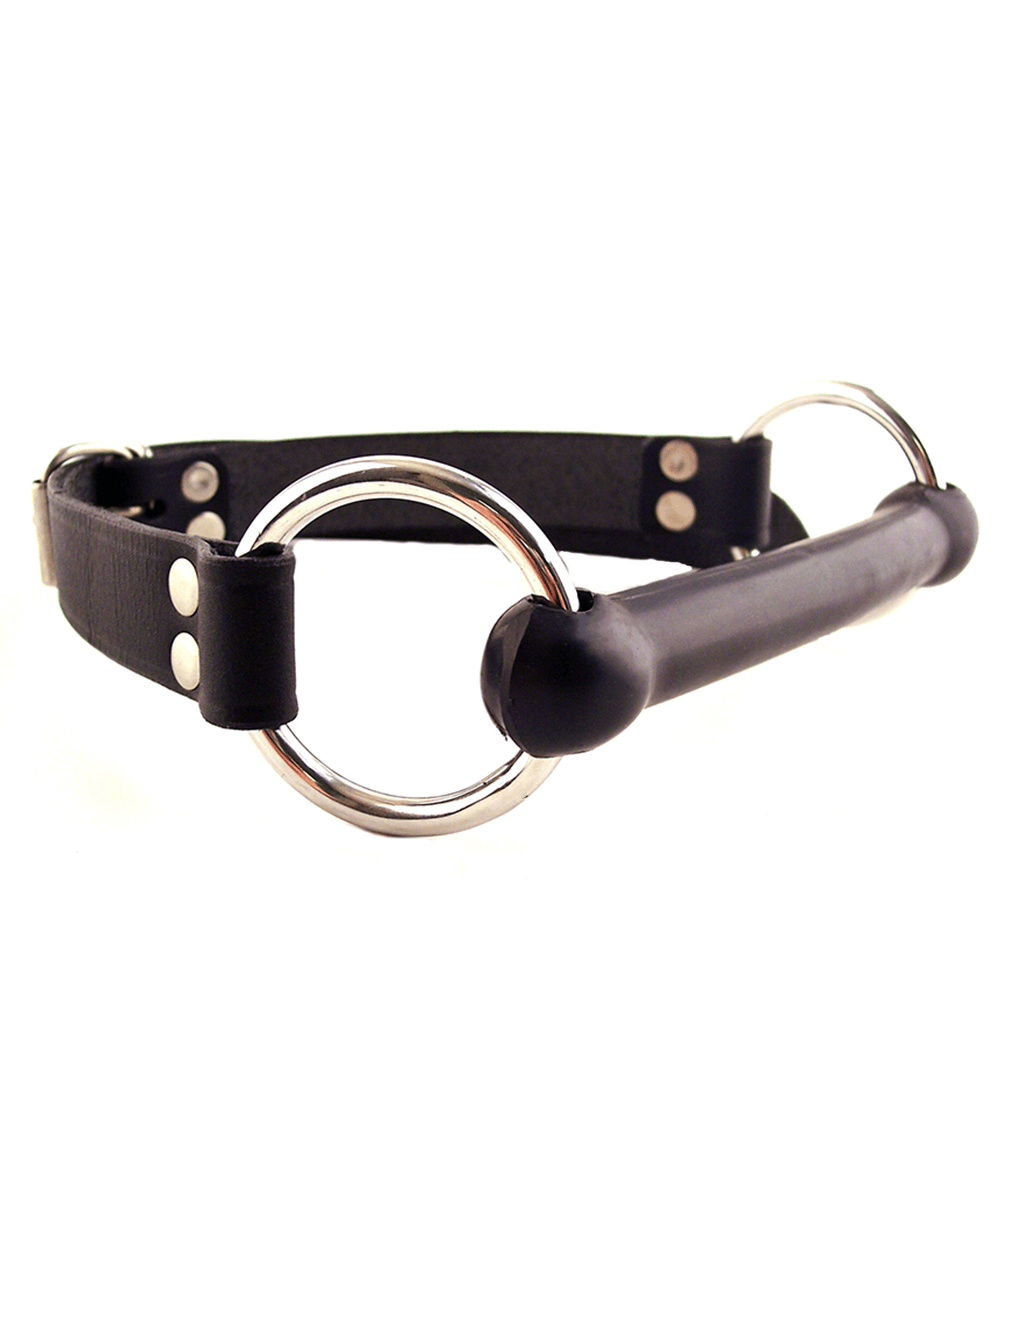 Rouge Leather & O-Ring Rubber Rod Gag - Black - Main